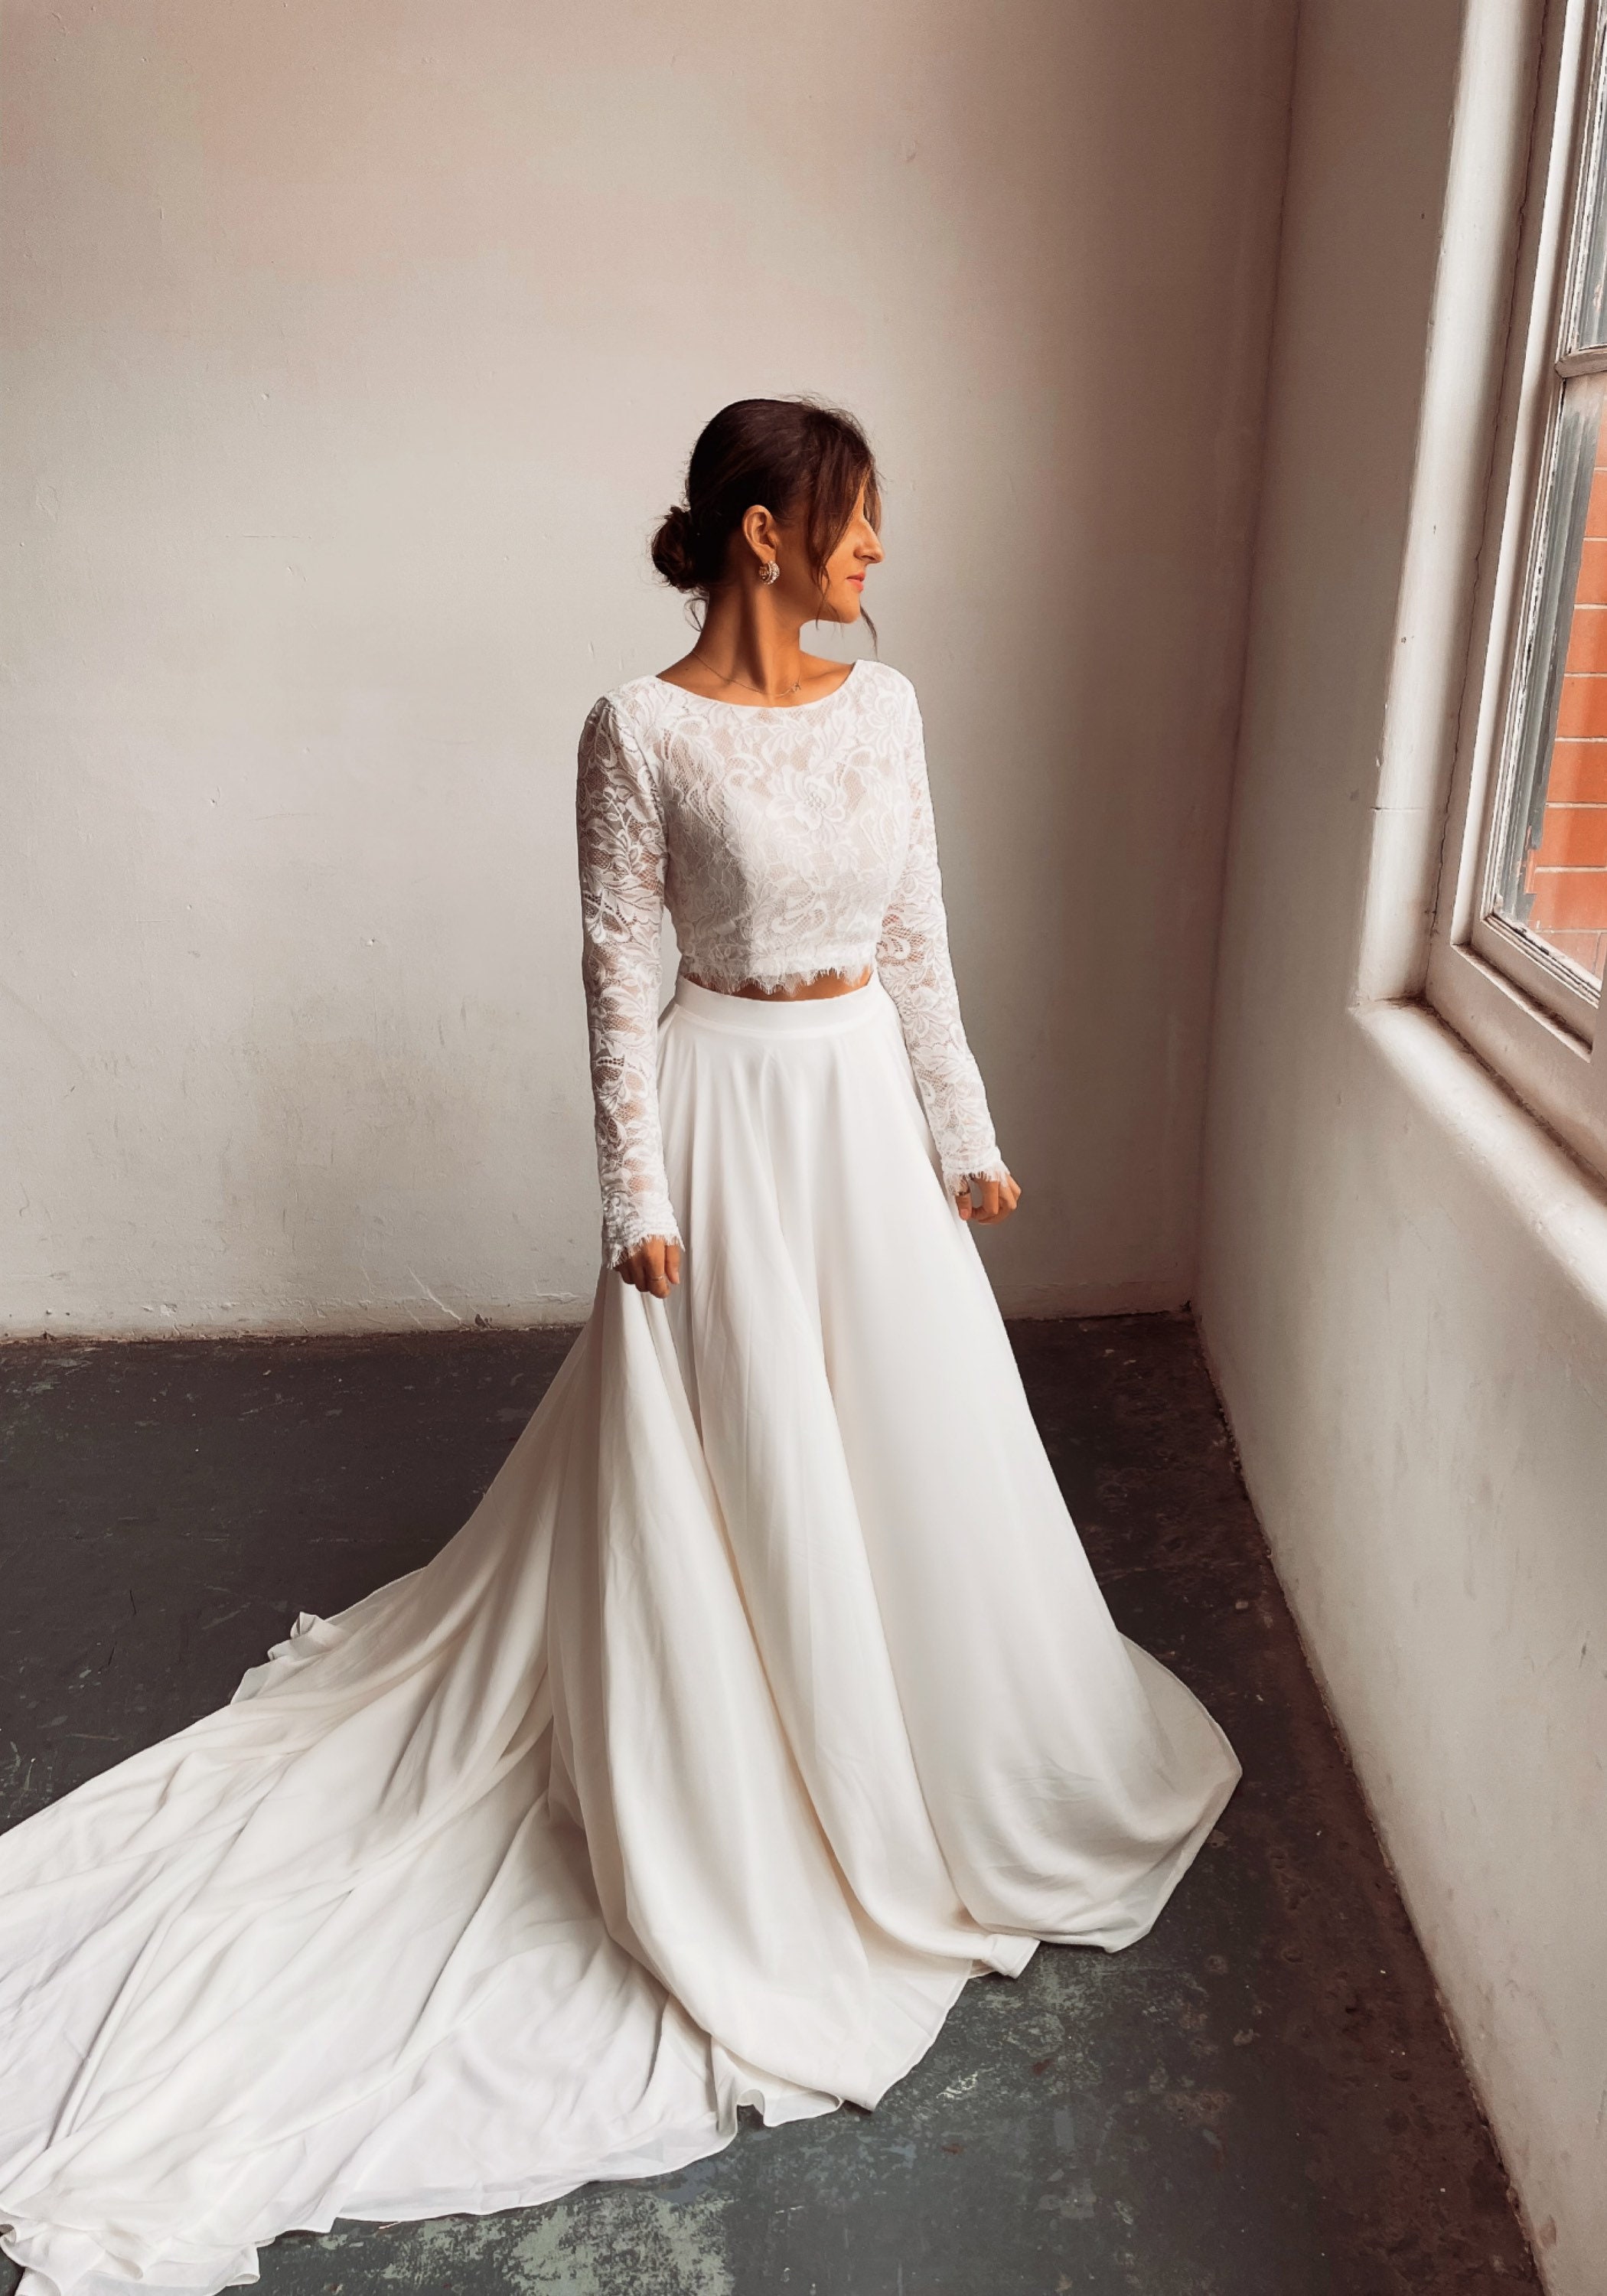 Rustic Sleeve Lace Crop Top 2 Piece Wedding Dress with Chiffon Skirt and  Pockets